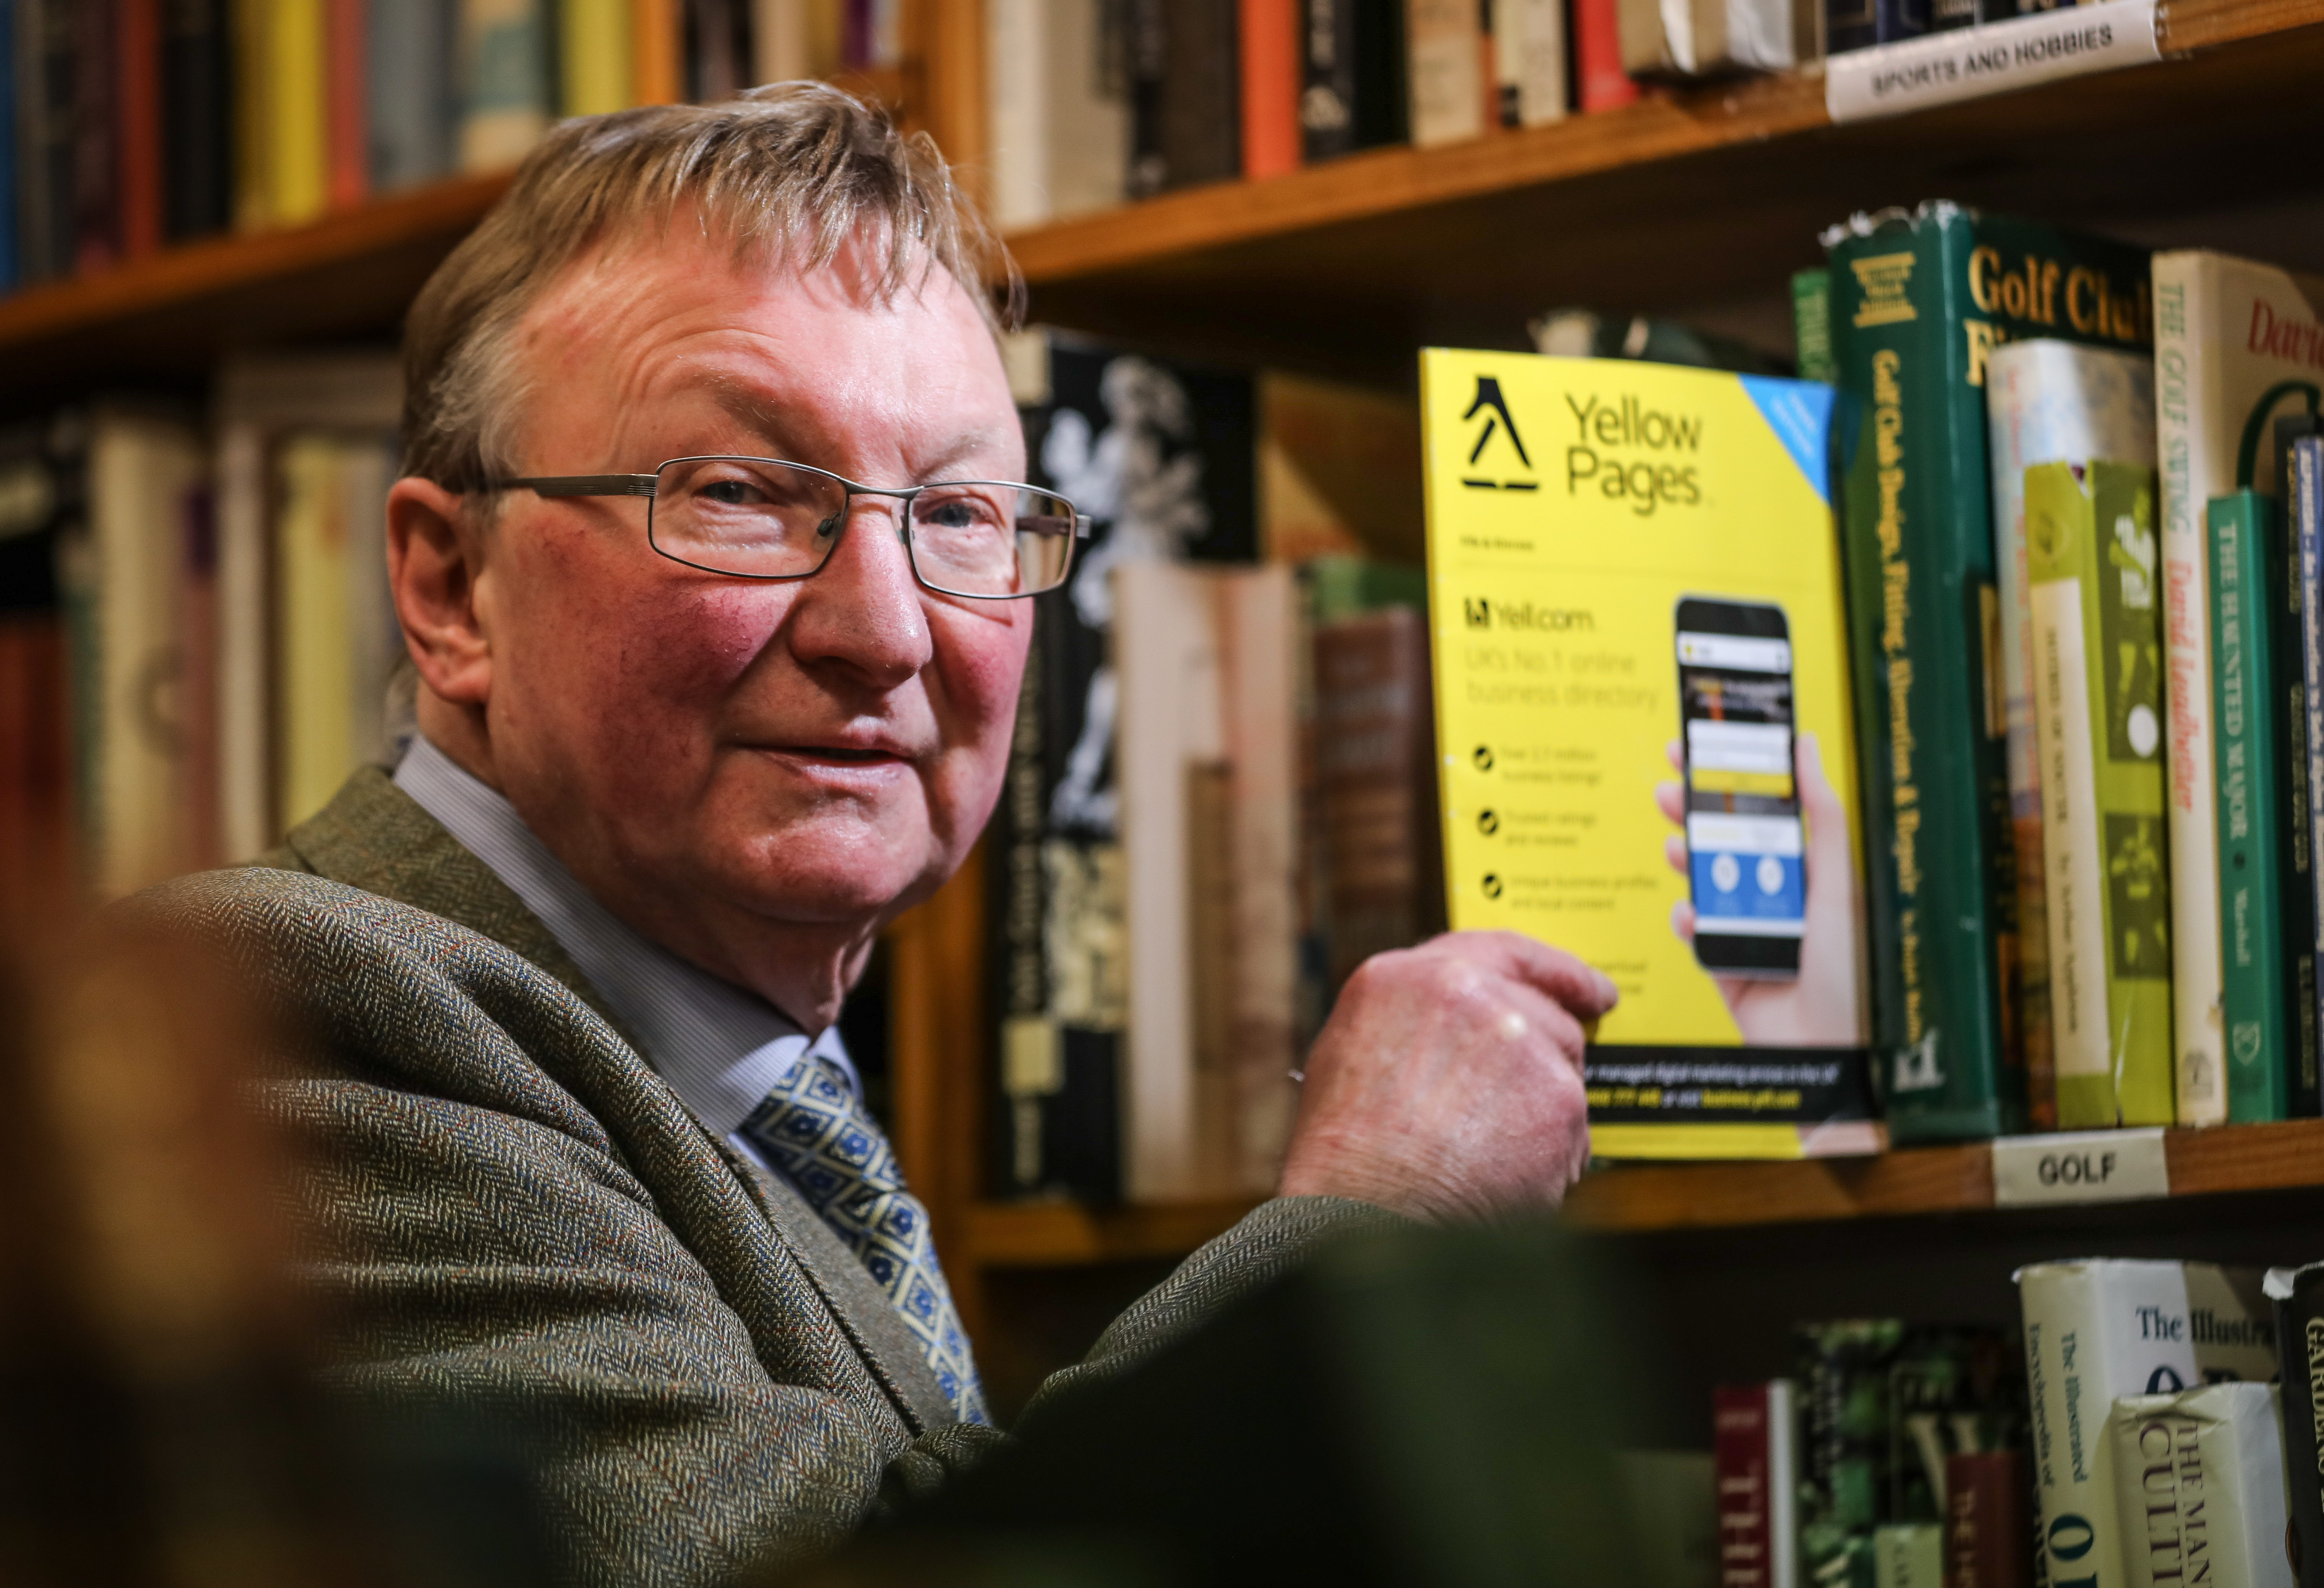 Bill Anderson of Bouquiniste Bookshop in St Andrews